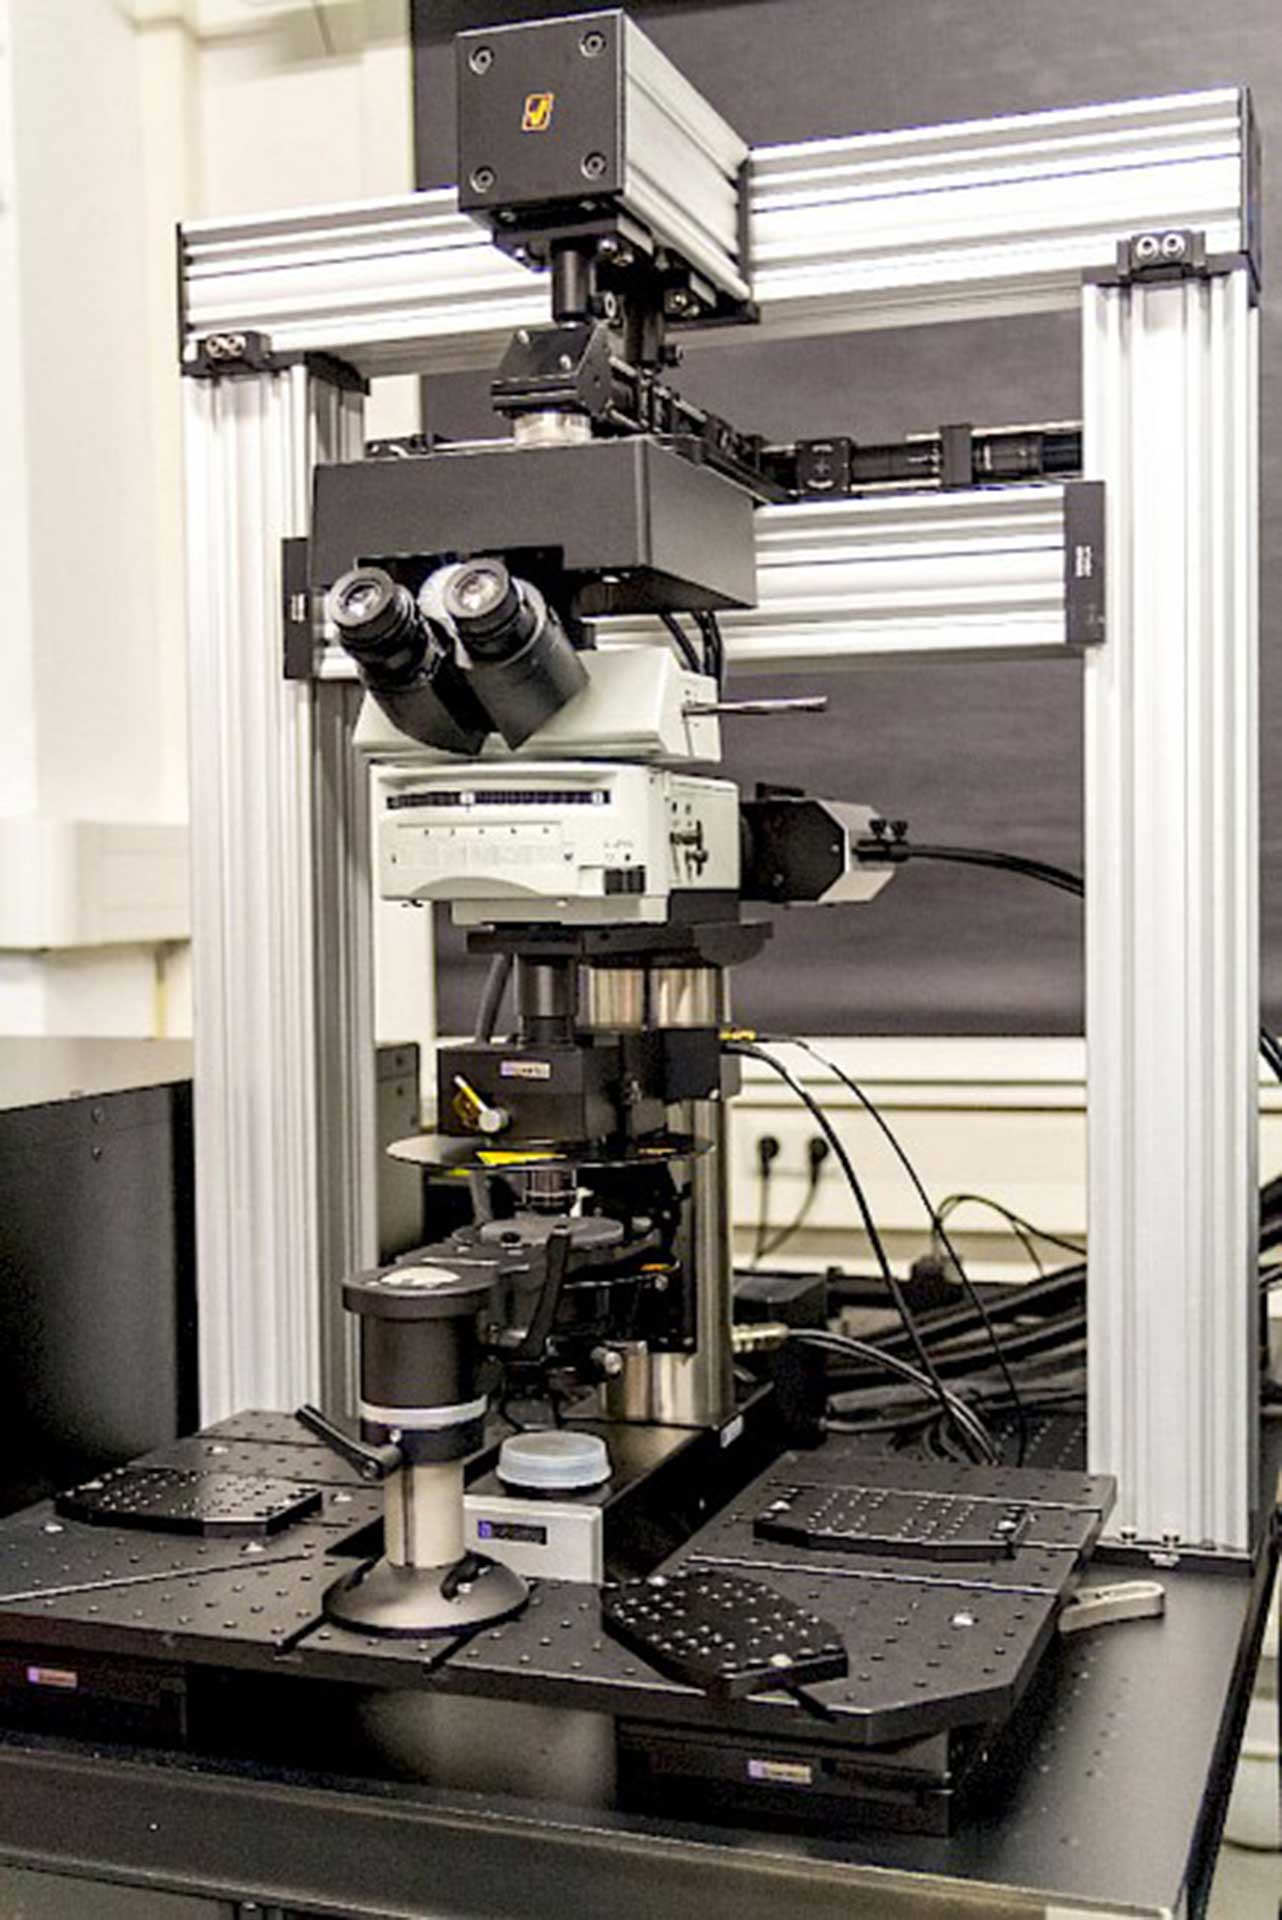 Custom upright 3D STED microscope by abberior in full view